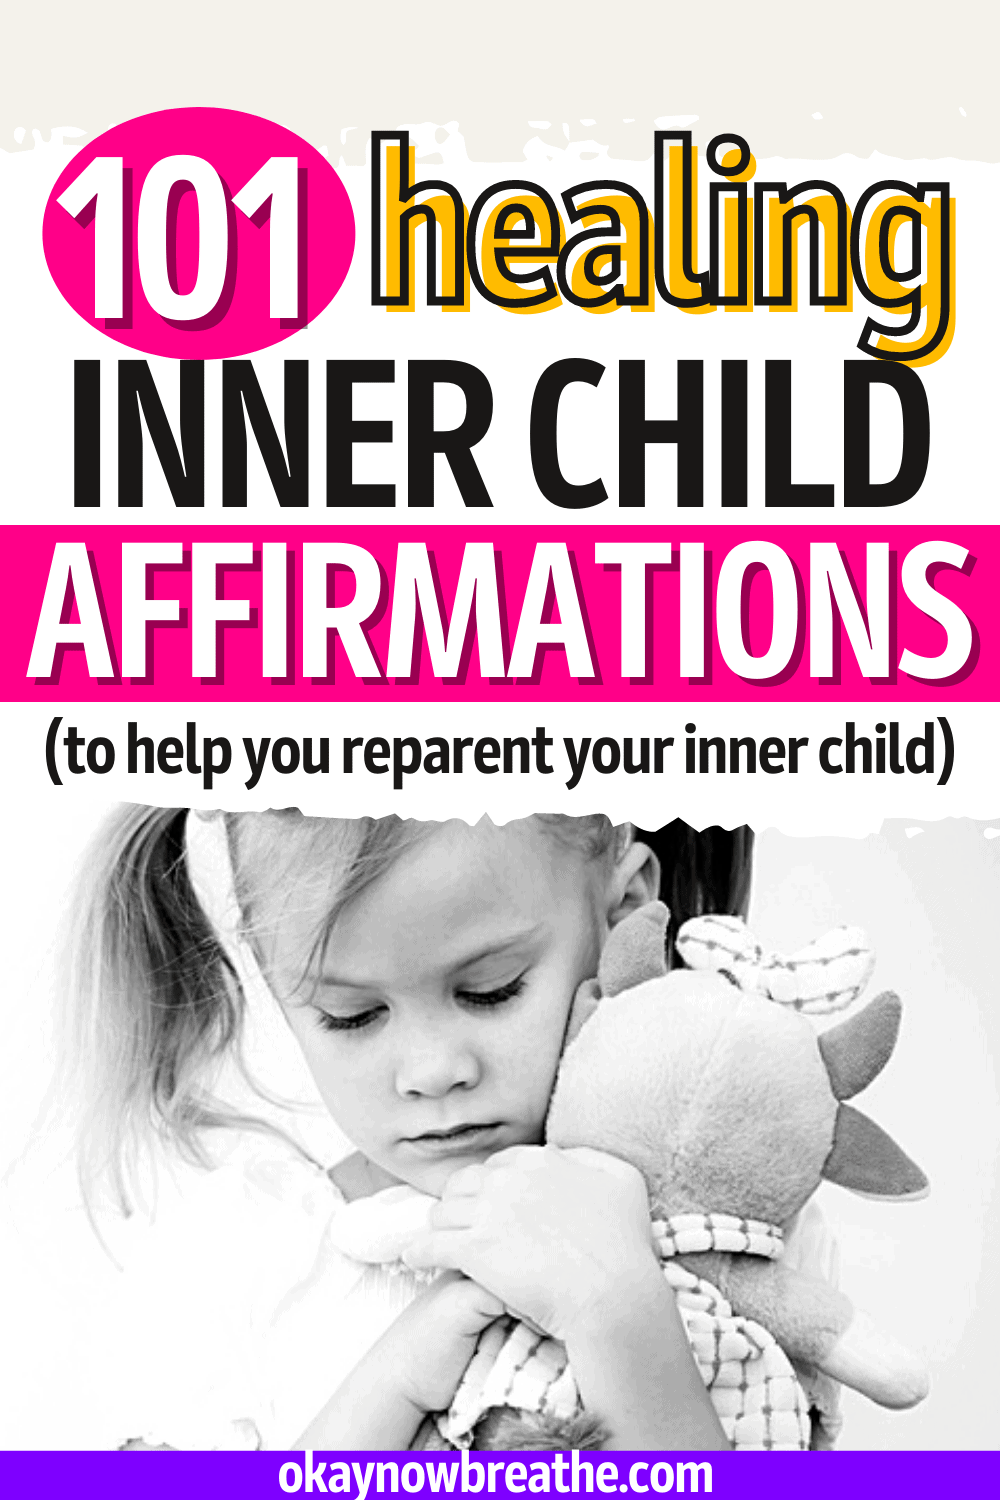 A young girl holding a stuffed animal tight against her chest. The picture is in black and white. Text above says, "101 healing inner child affirmations (to help you reparent your inner child - okaynowbreathe).